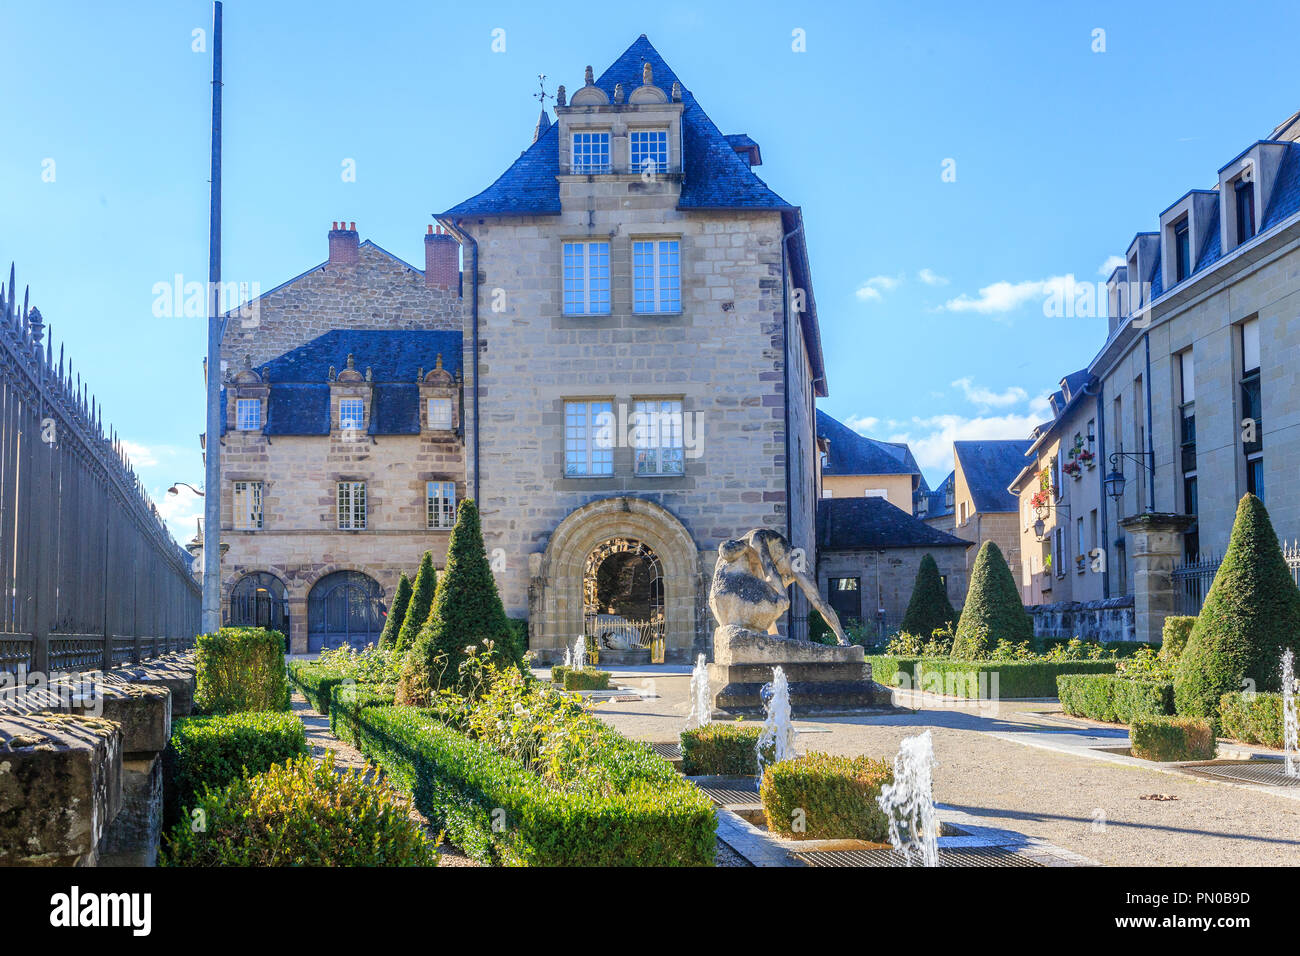 France, Correze, Brive la Gaillarde, Maison Cavaignac, former lodging house of the Nuns of the Order of Saint Clare, shelters the municipal archives / Stock Photo